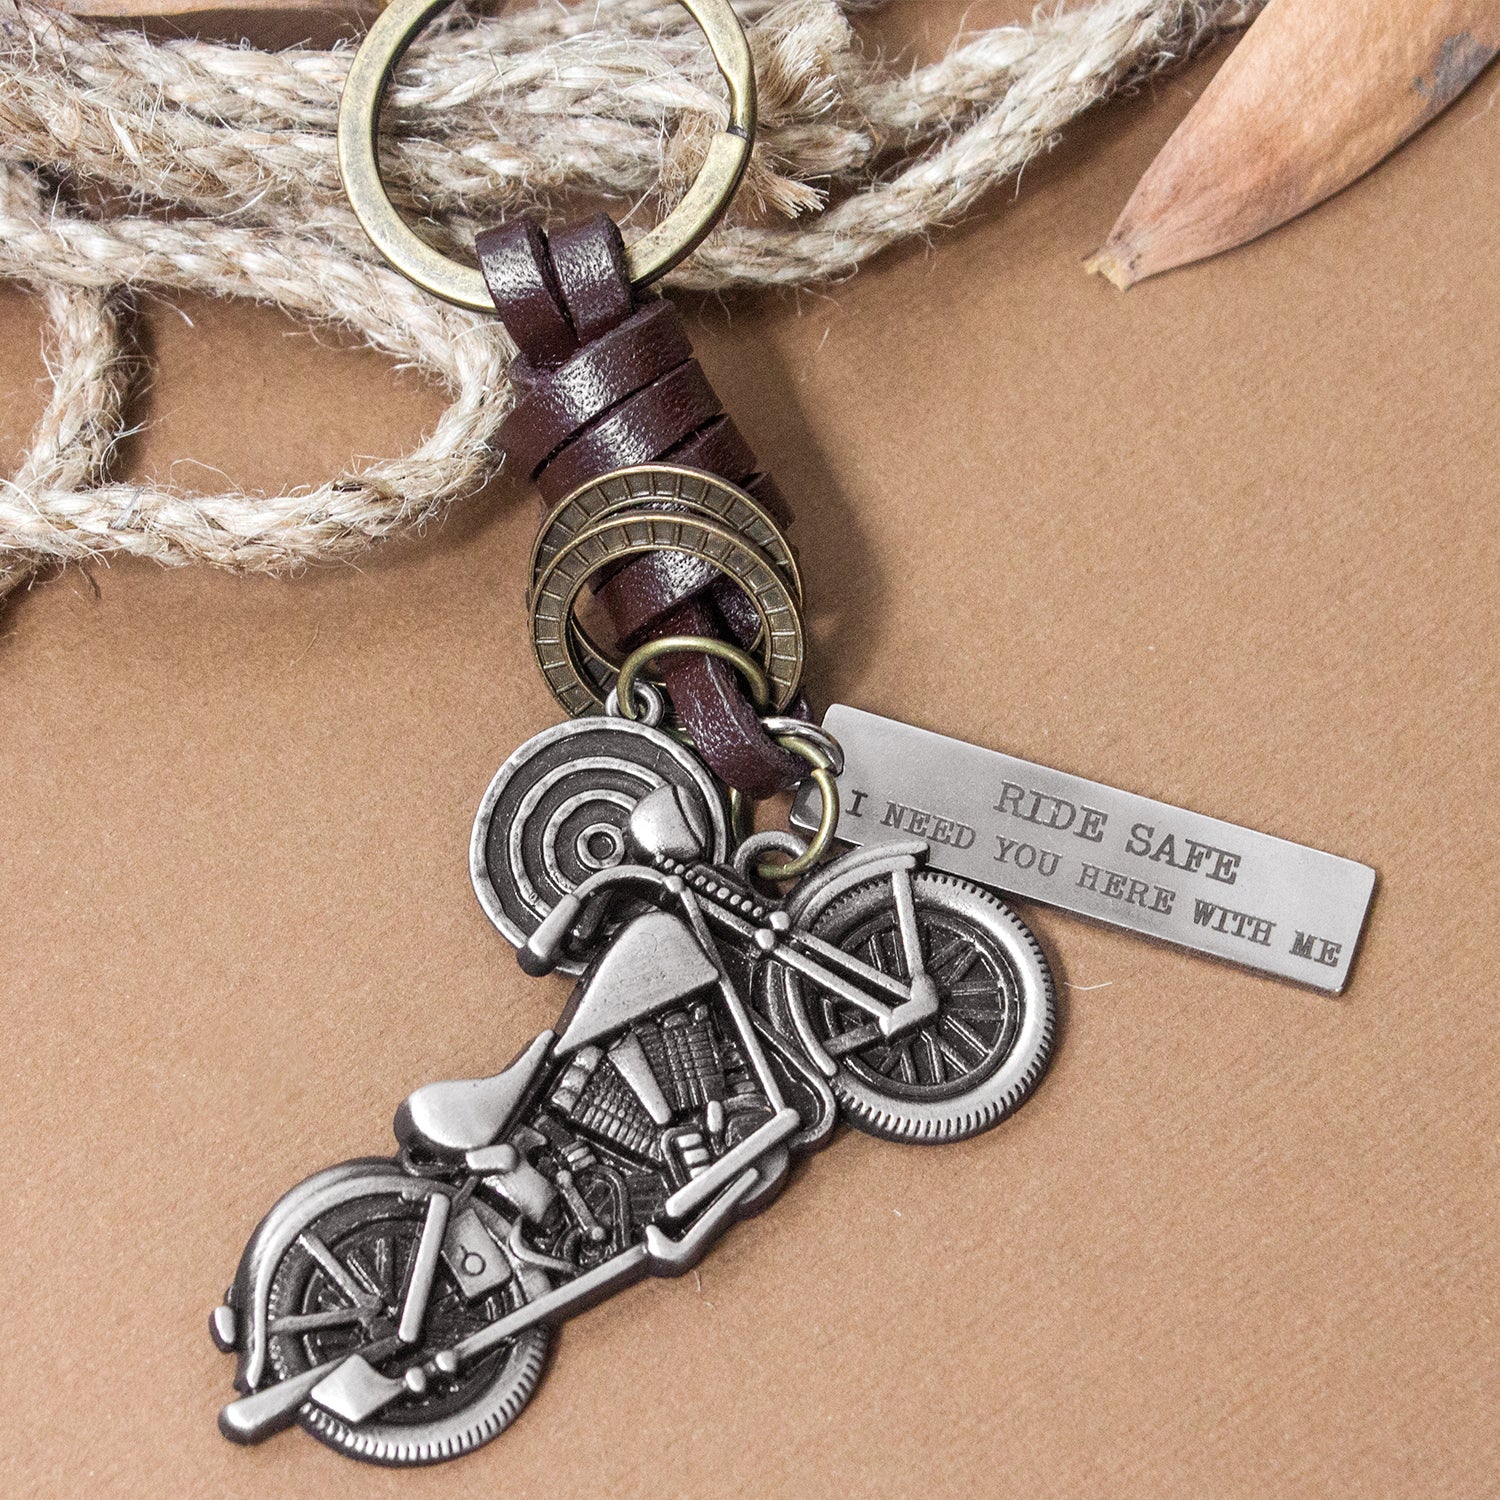 Motorcycle Keychain - Biker - To My Son - Ride Safe, I Need You Here With Me